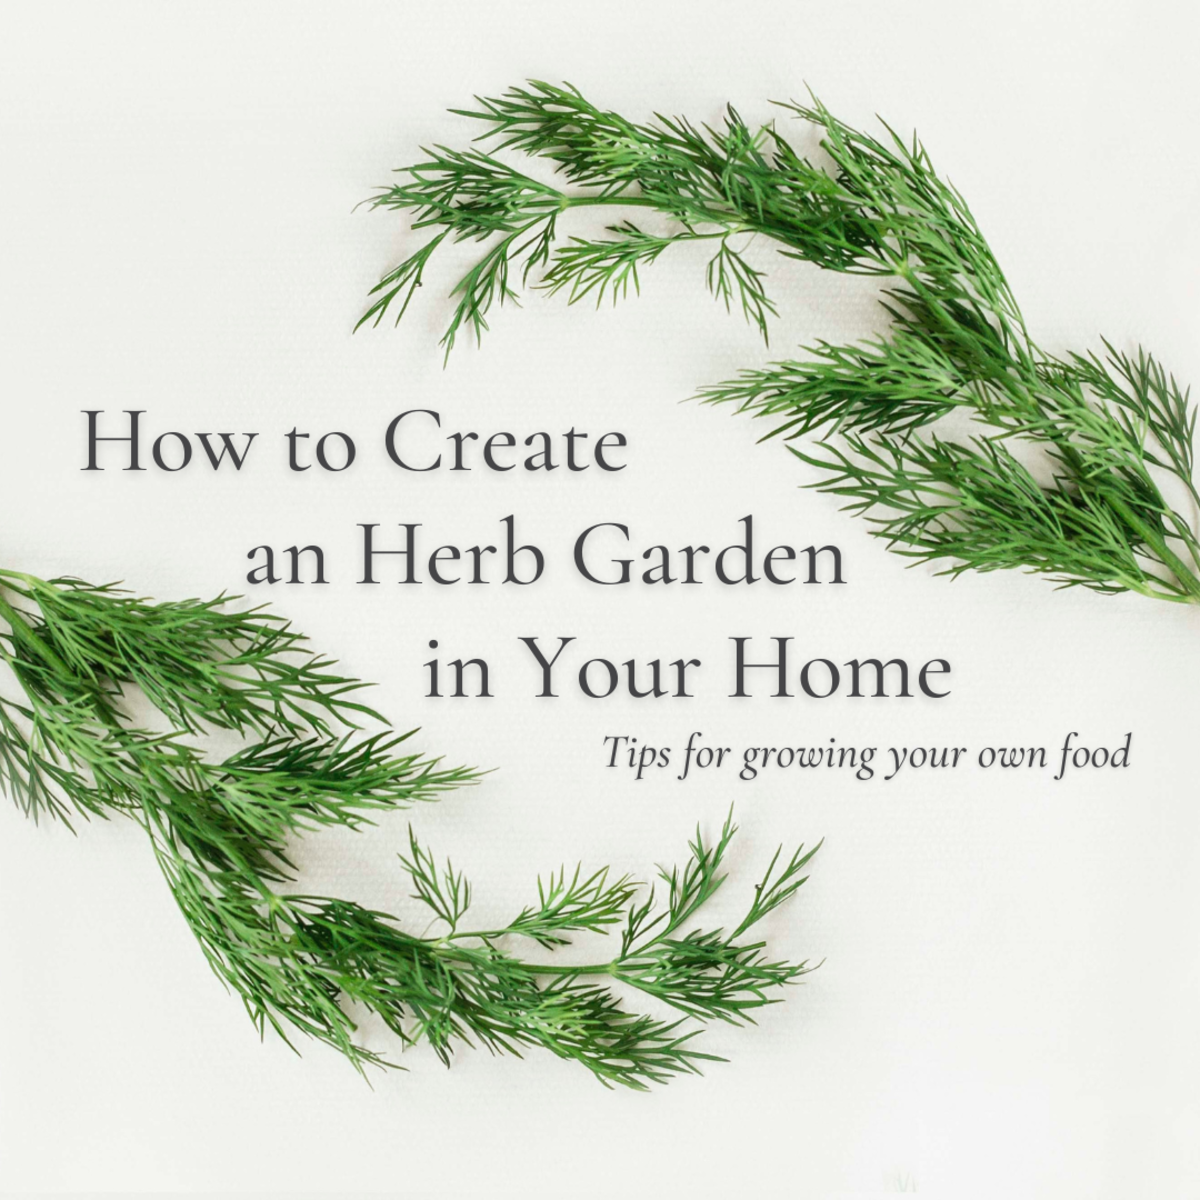 How to Create an Herb Garden in Your Home